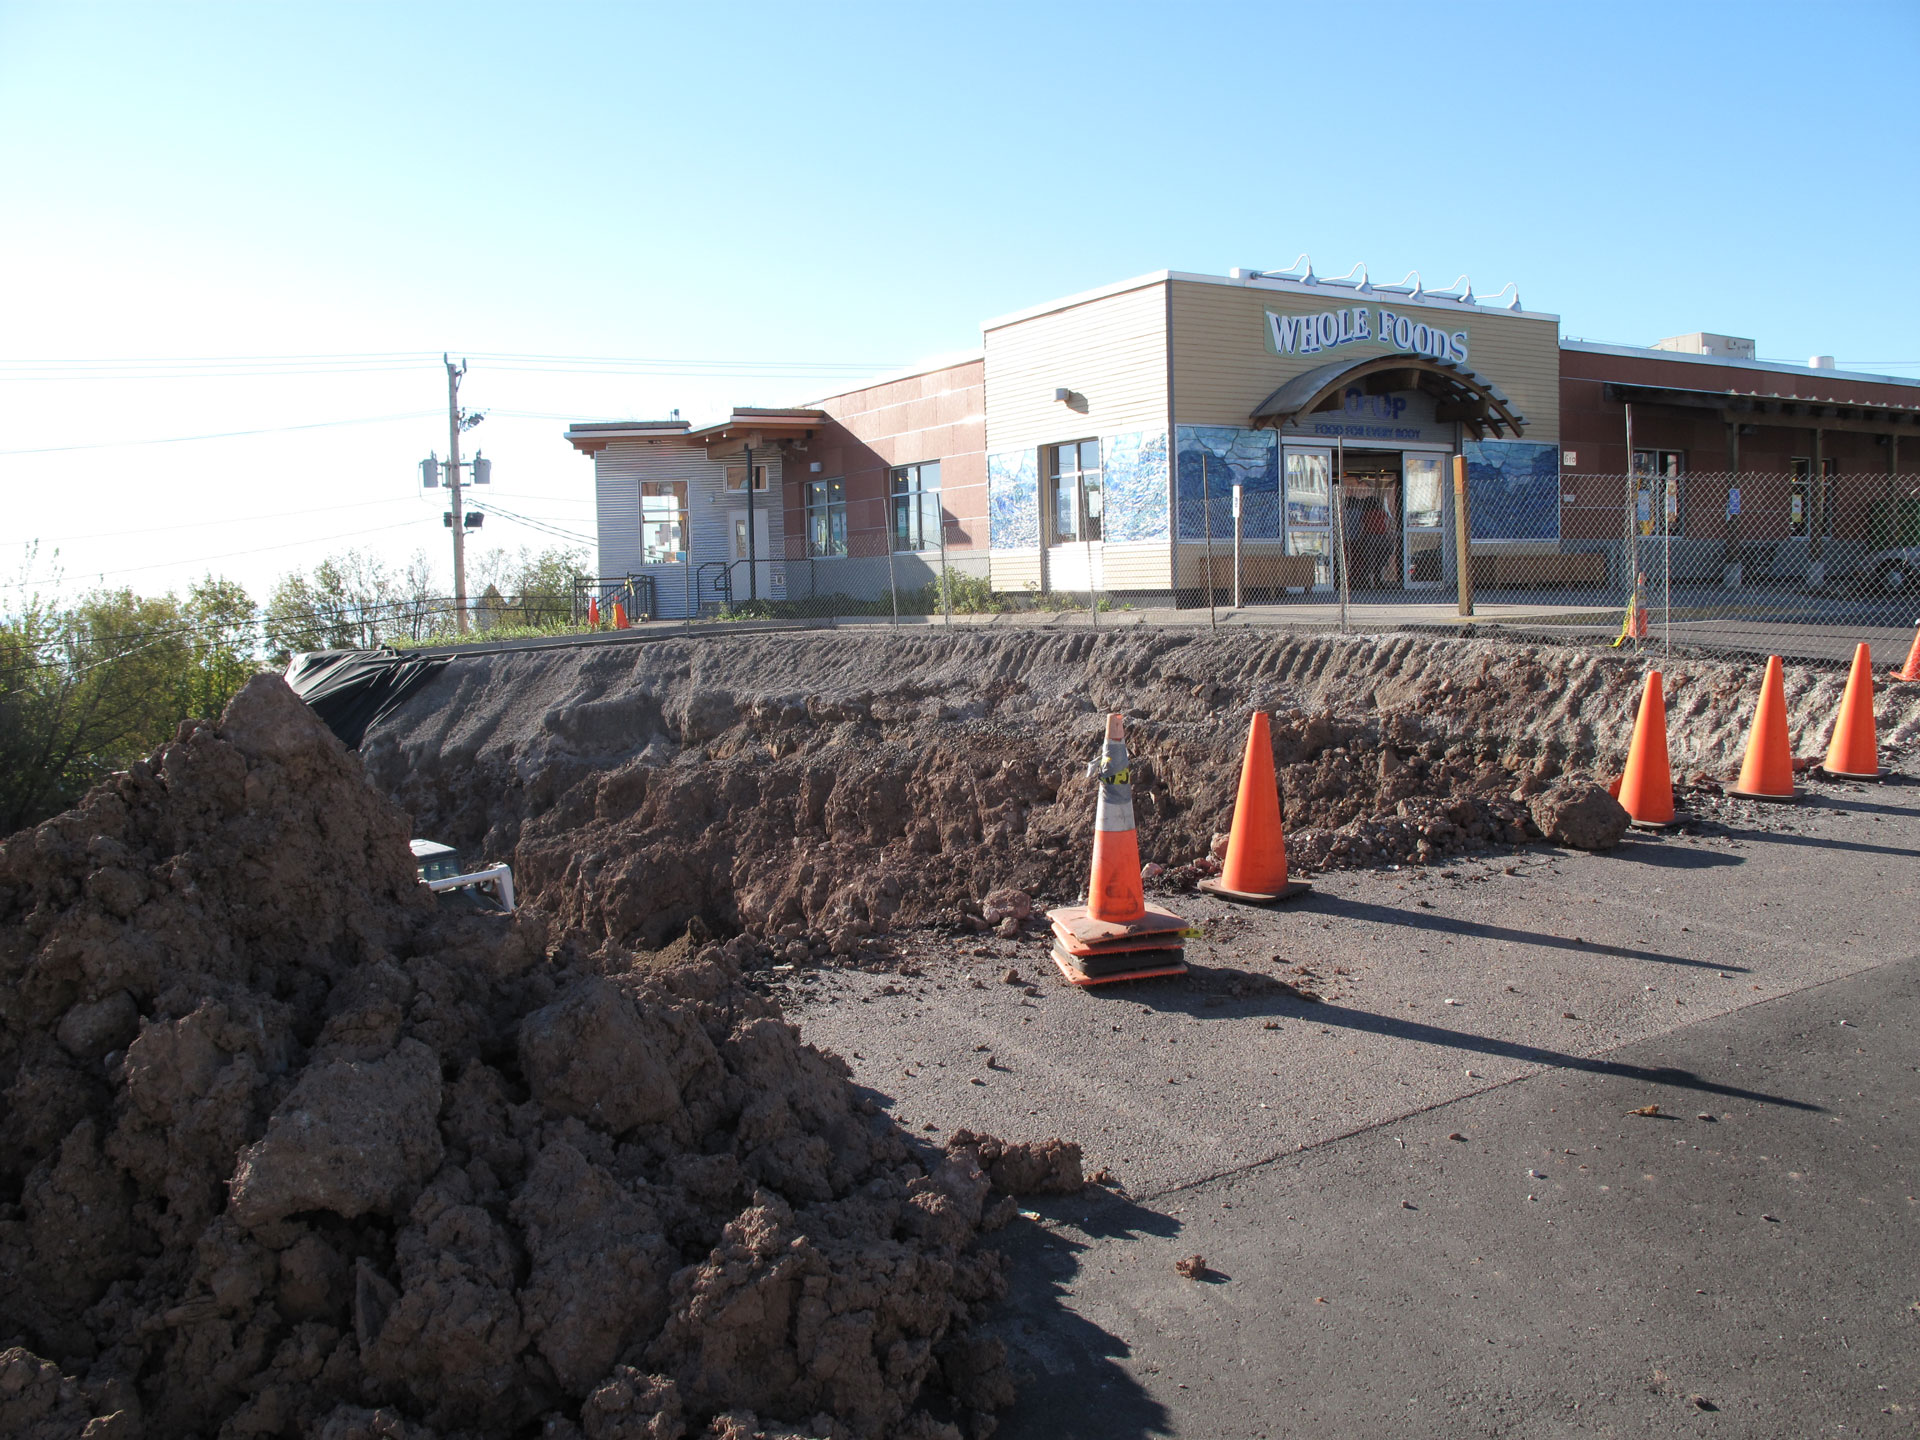 Construction site in front of the Whole Foods Coop in Duluth, MN. The area is fenced off with orange cones and dug up soil piled beside a trench. The store's entrance is visible behind the barriers, and the sky is clear.